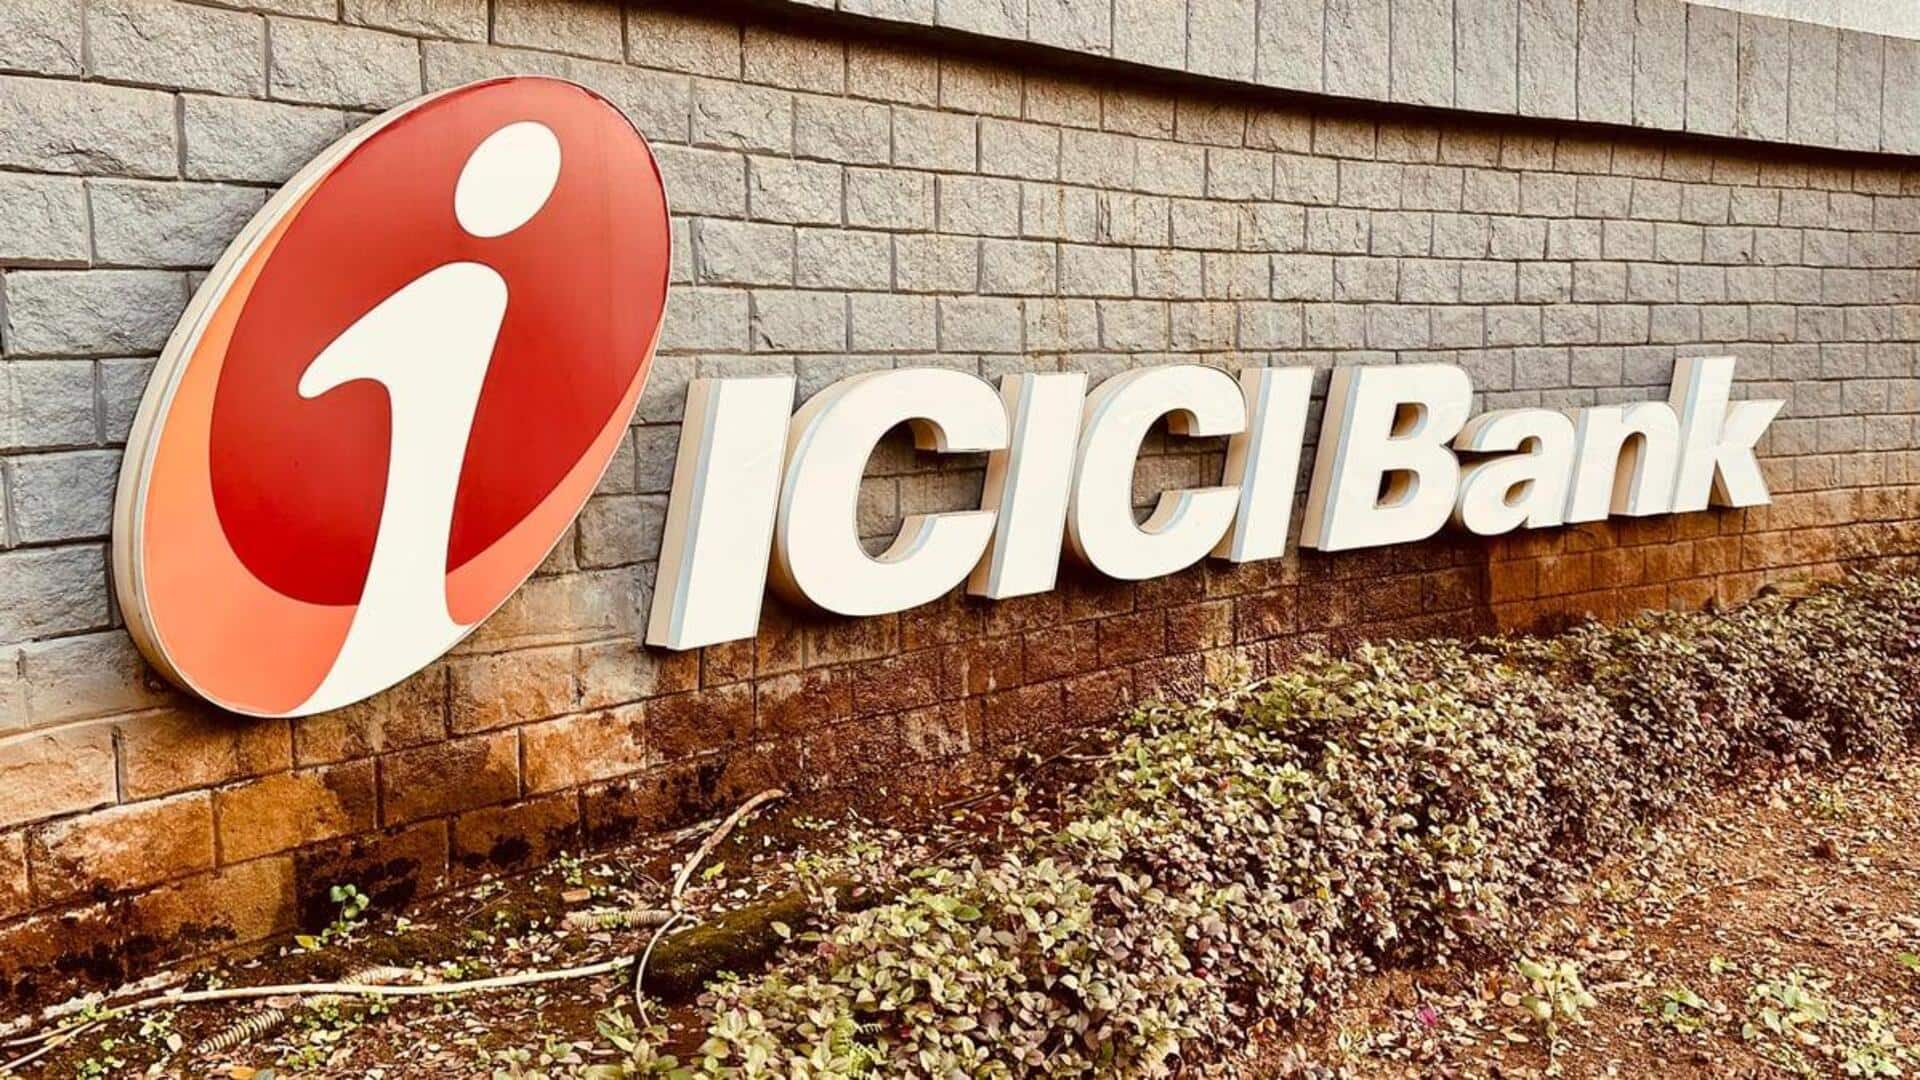 ICICI Bank shocker: Customer accuses manager of Rs. 16cr fraud